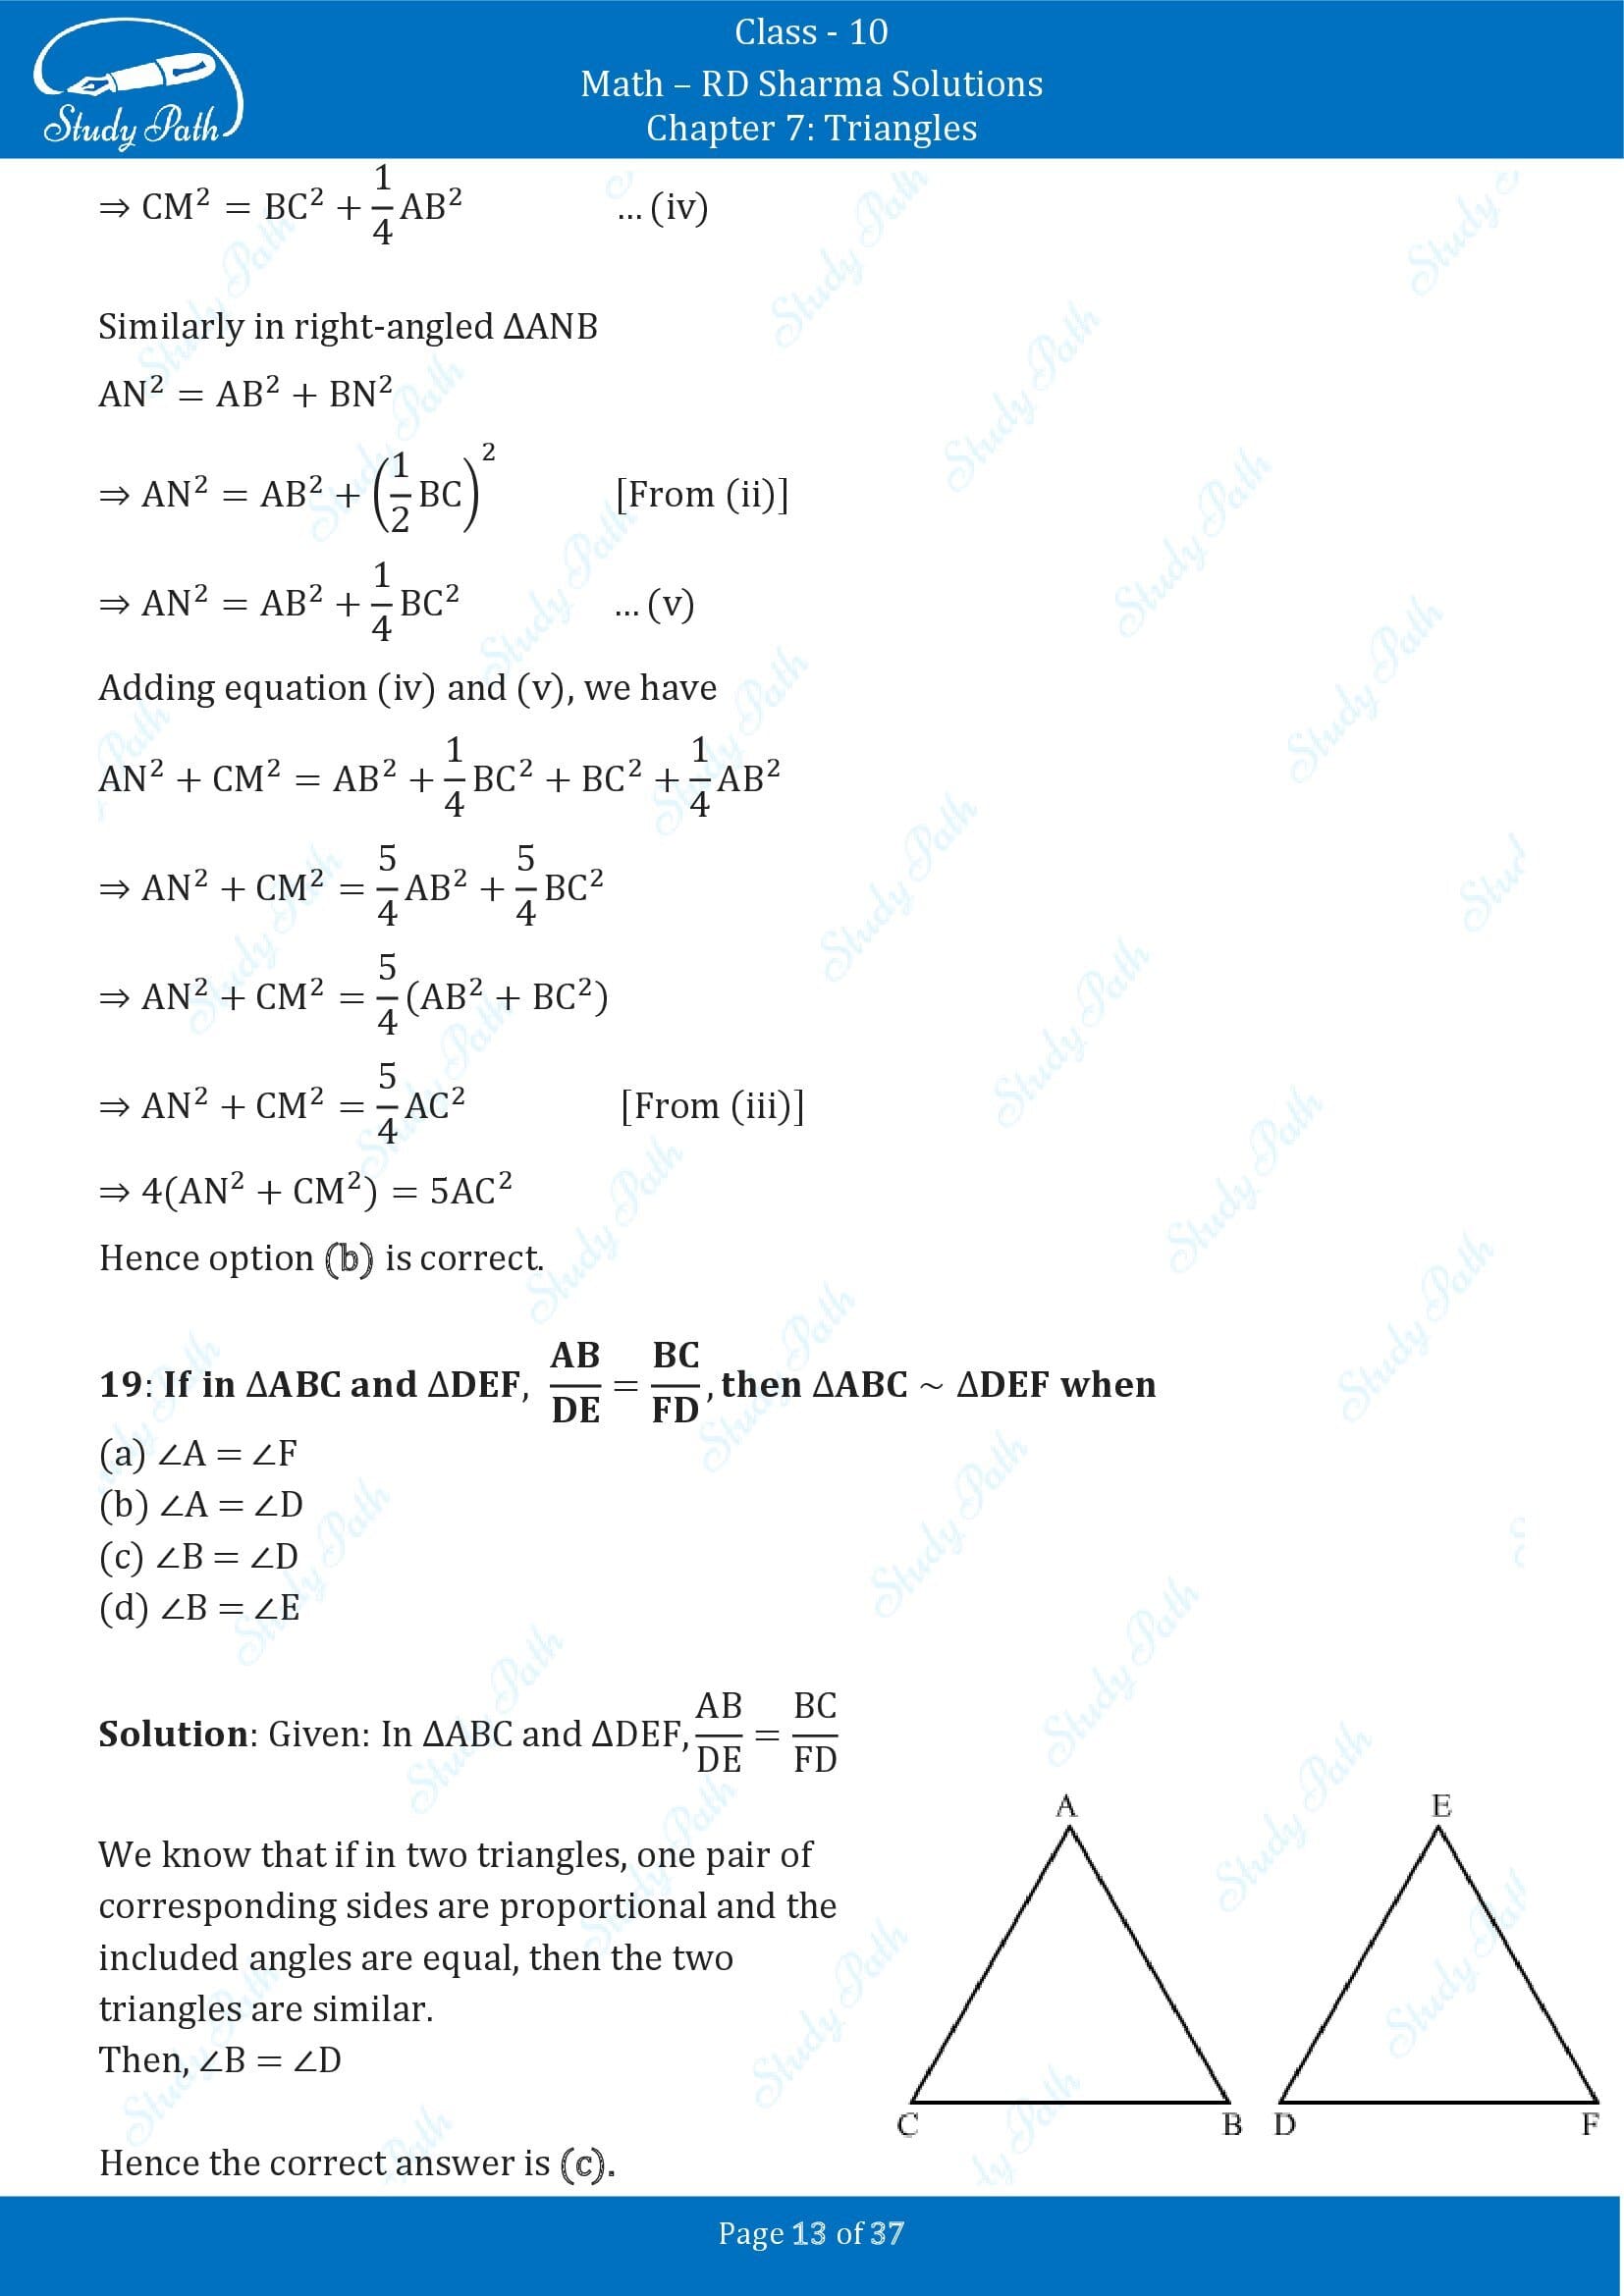 RD Sharma Solutions Class 10 Chapter 7 Triangles Multiple Choice Question MCQs 00013